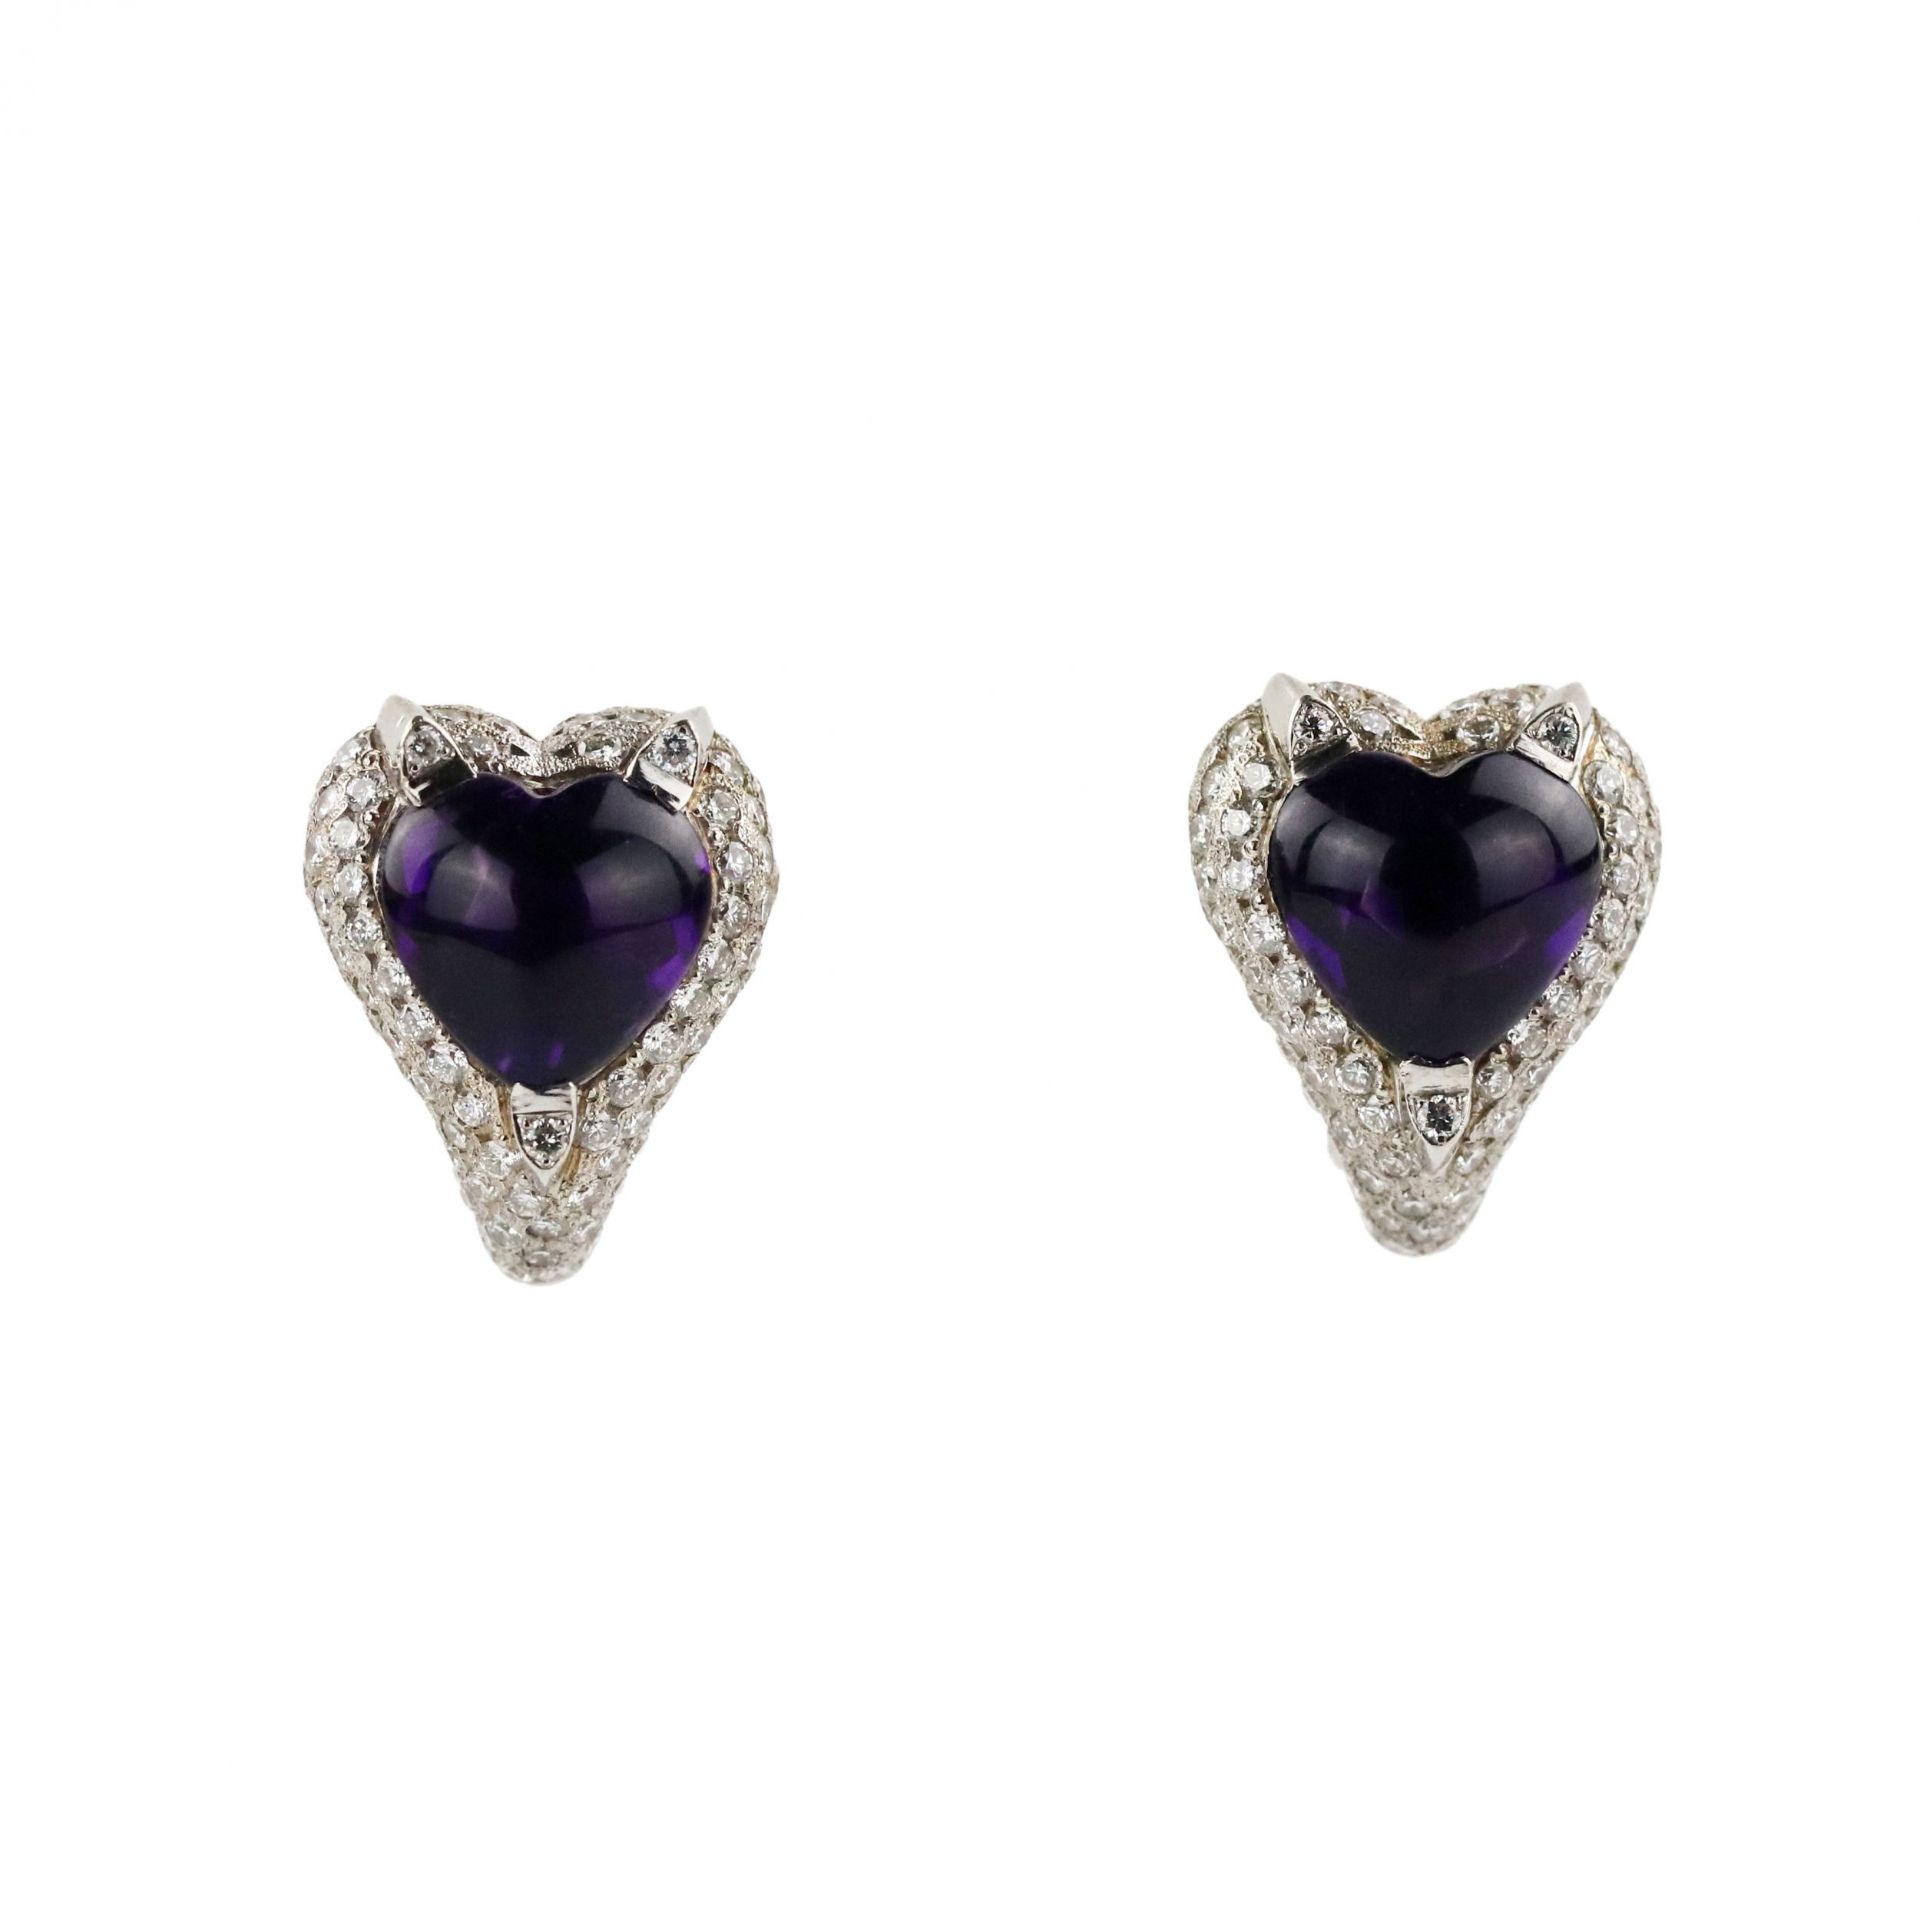 Jewelry set: ring with earrings, white gold with amethysts and diamonds. - Image 6 of 11